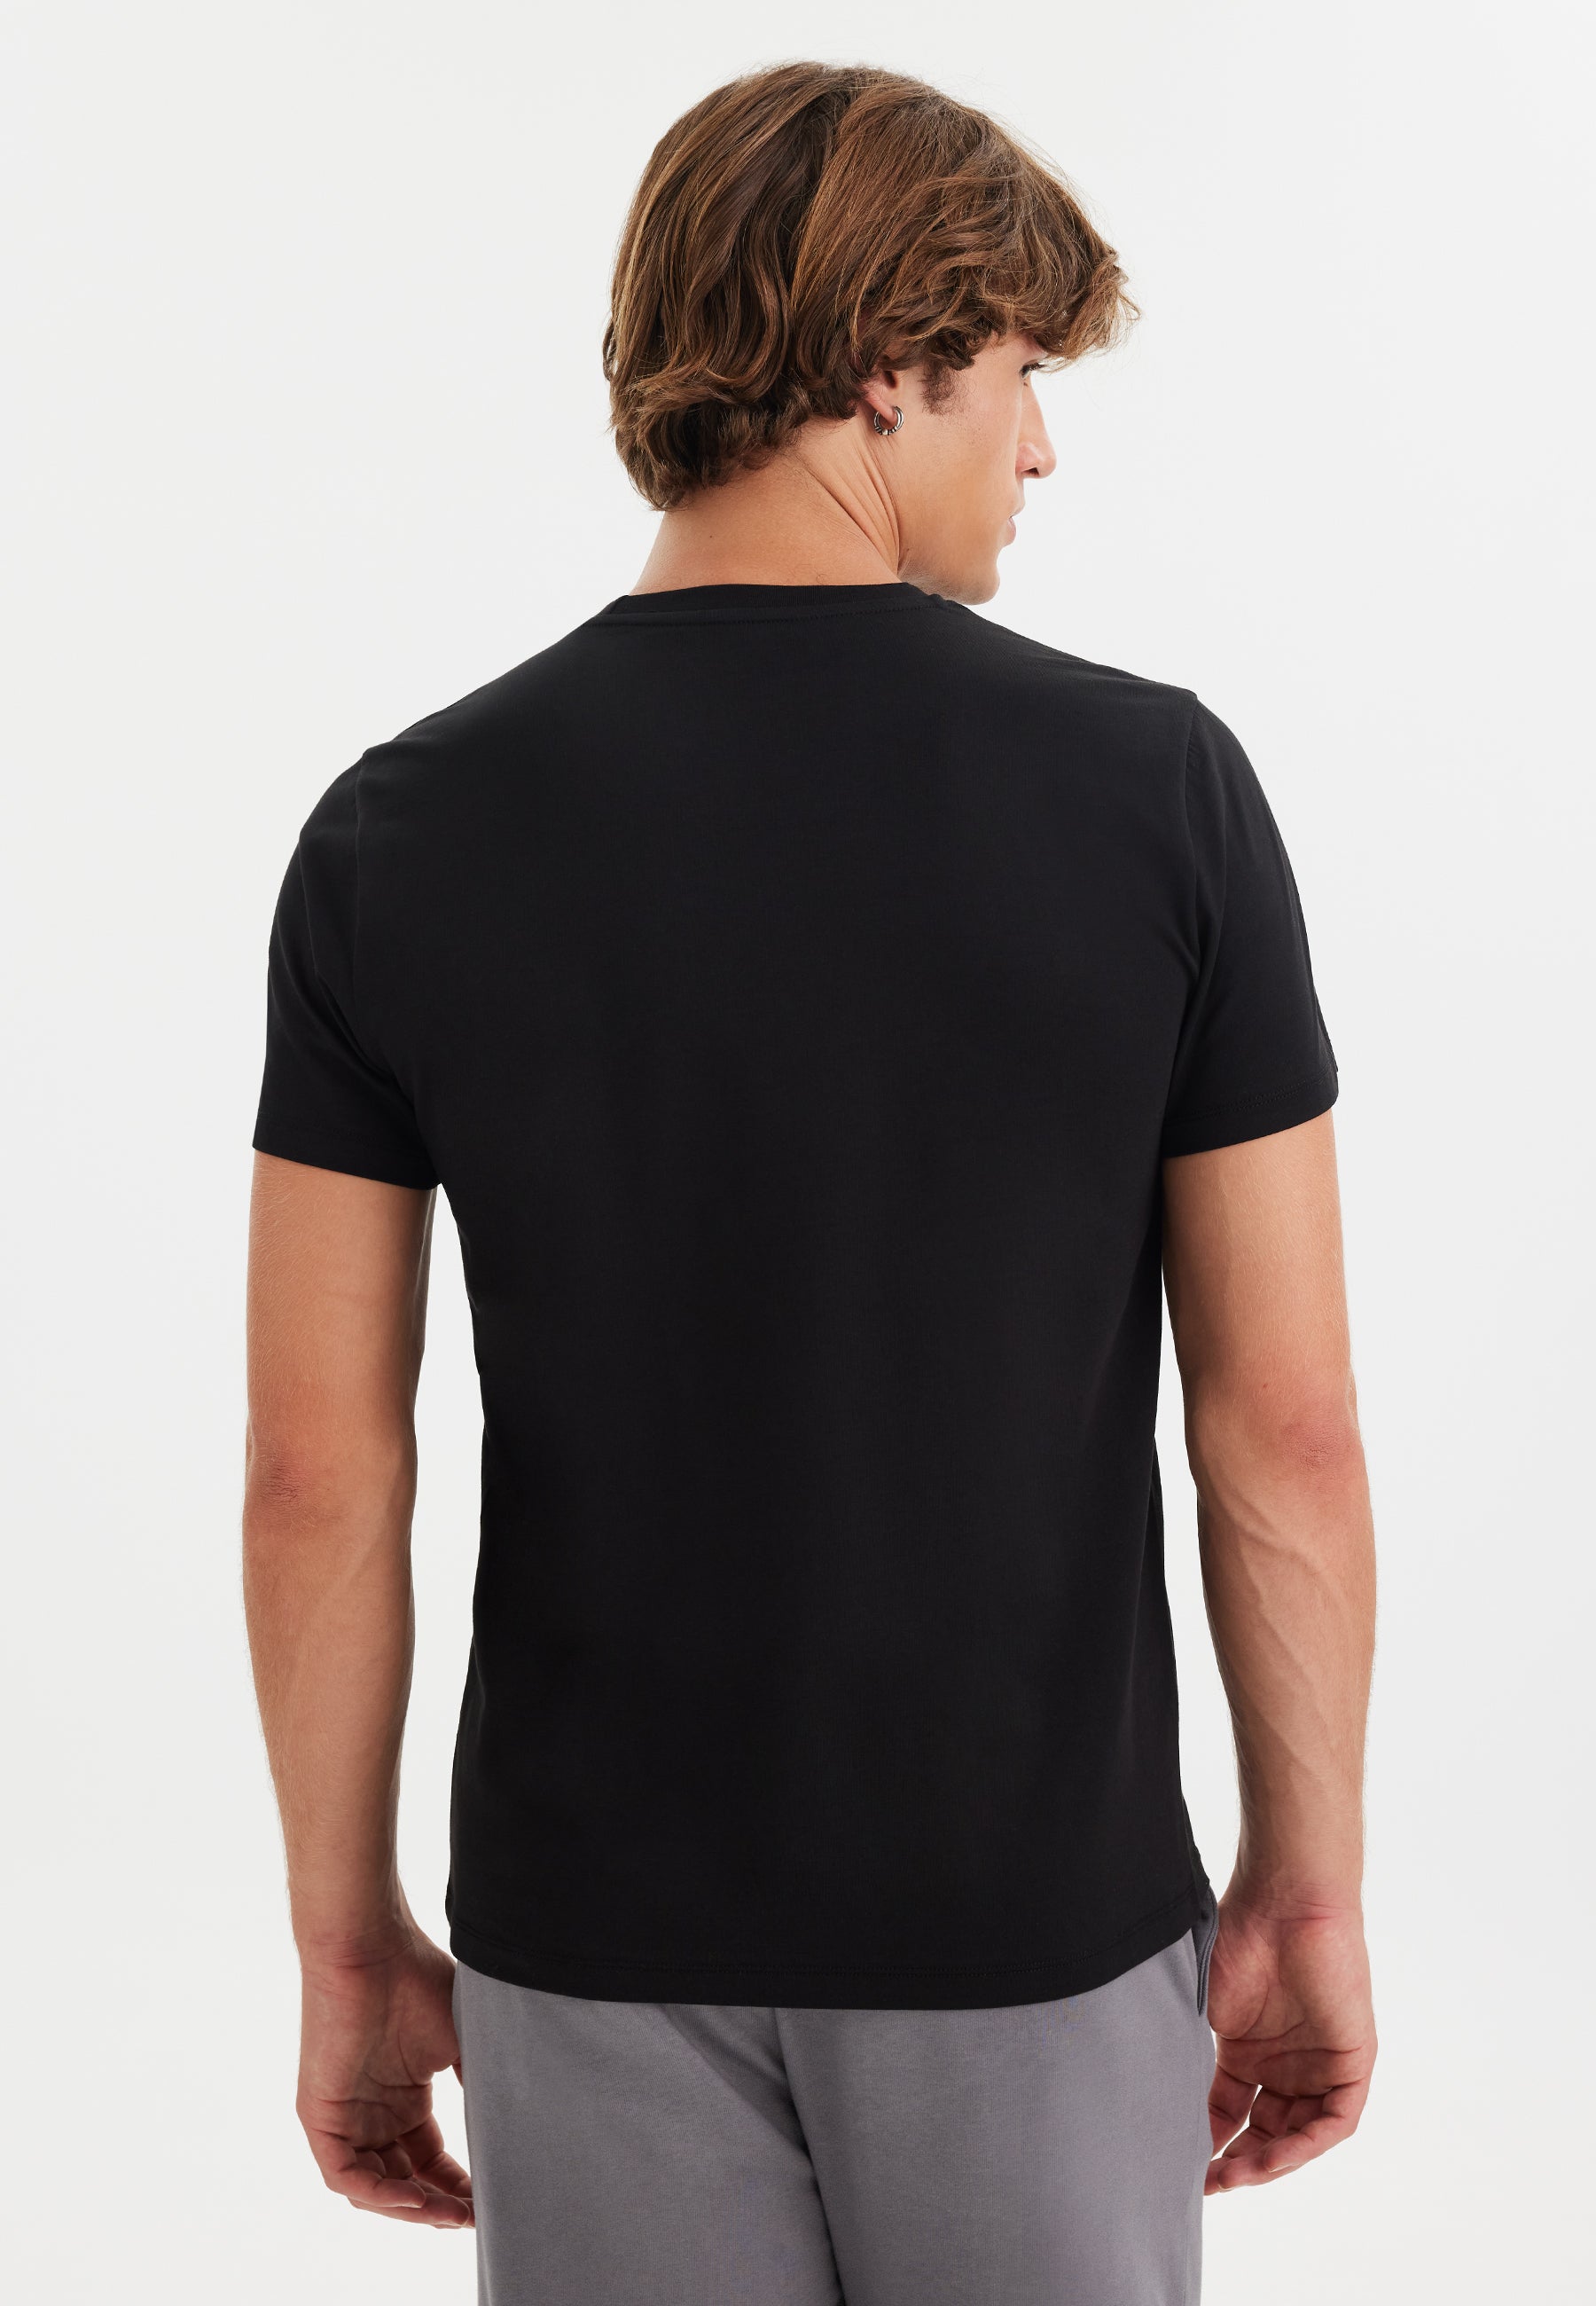 WMEMBROIDERY SIMPLICITY TEE in Black